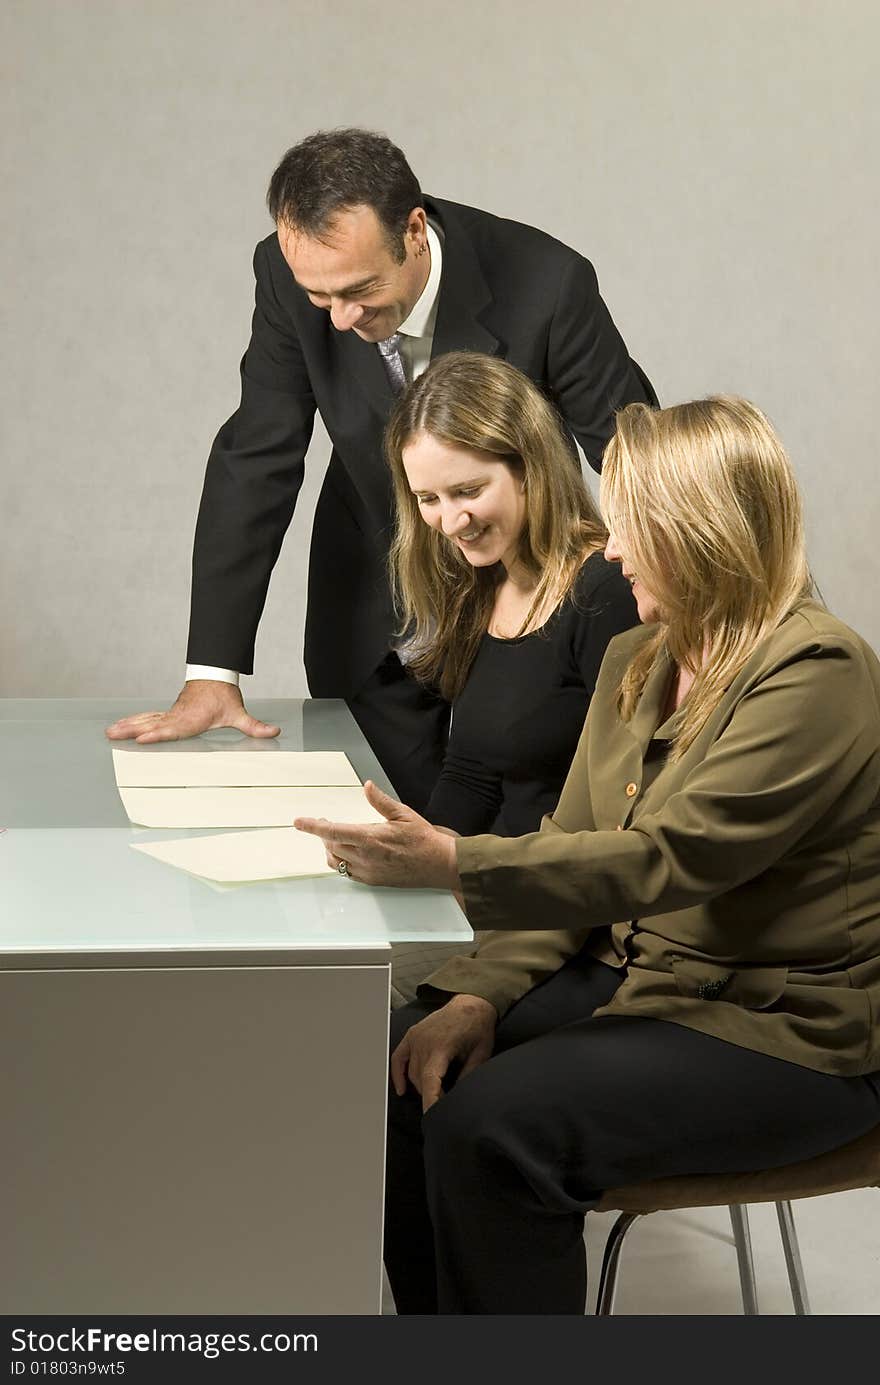 Three people are in a business meeting. They are smiling and looking at some pieces of paper on the table. The women are sitting and the man is standing. Vertically framed shot. Three people are in a business meeting. They are smiling and looking at some pieces of paper on the table. The women are sitting and the man is standing. Vertically framed shot.